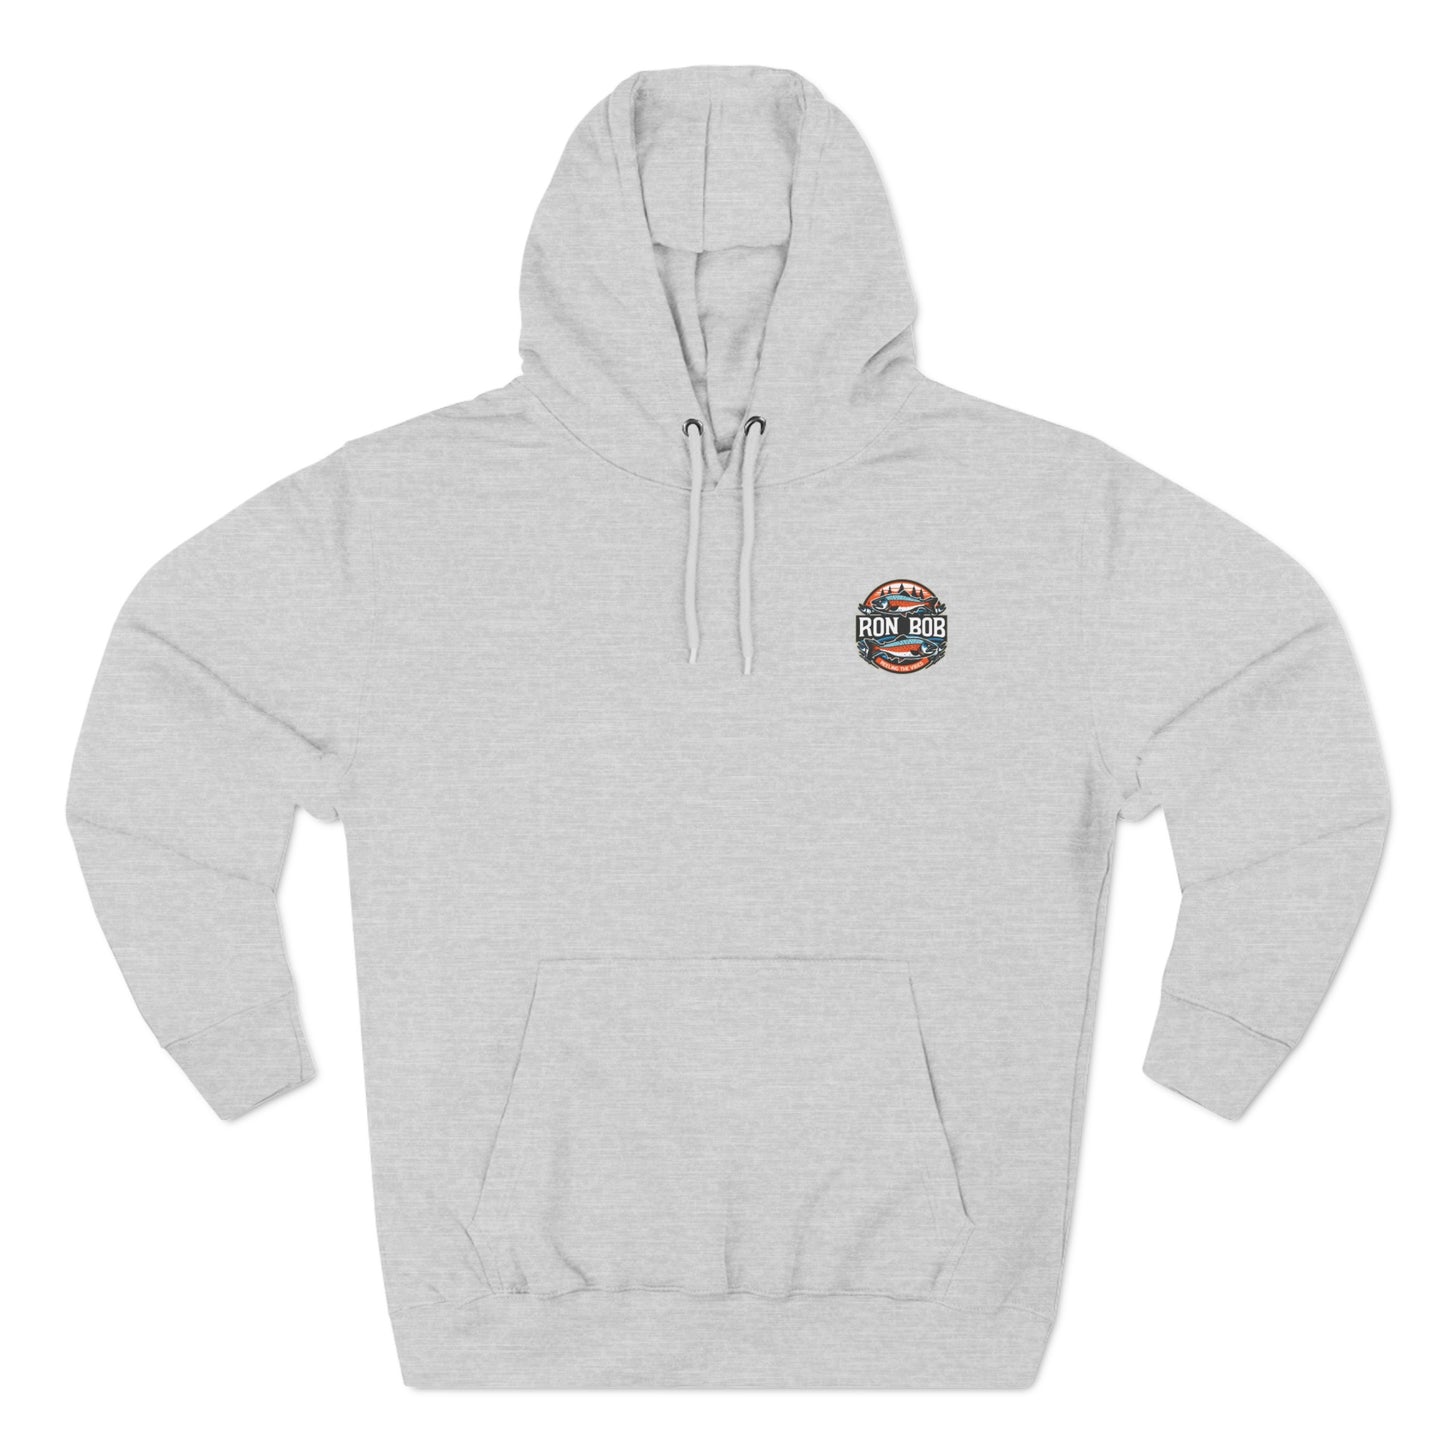 PacNW Vibe Hoodie - Multiple Color Options